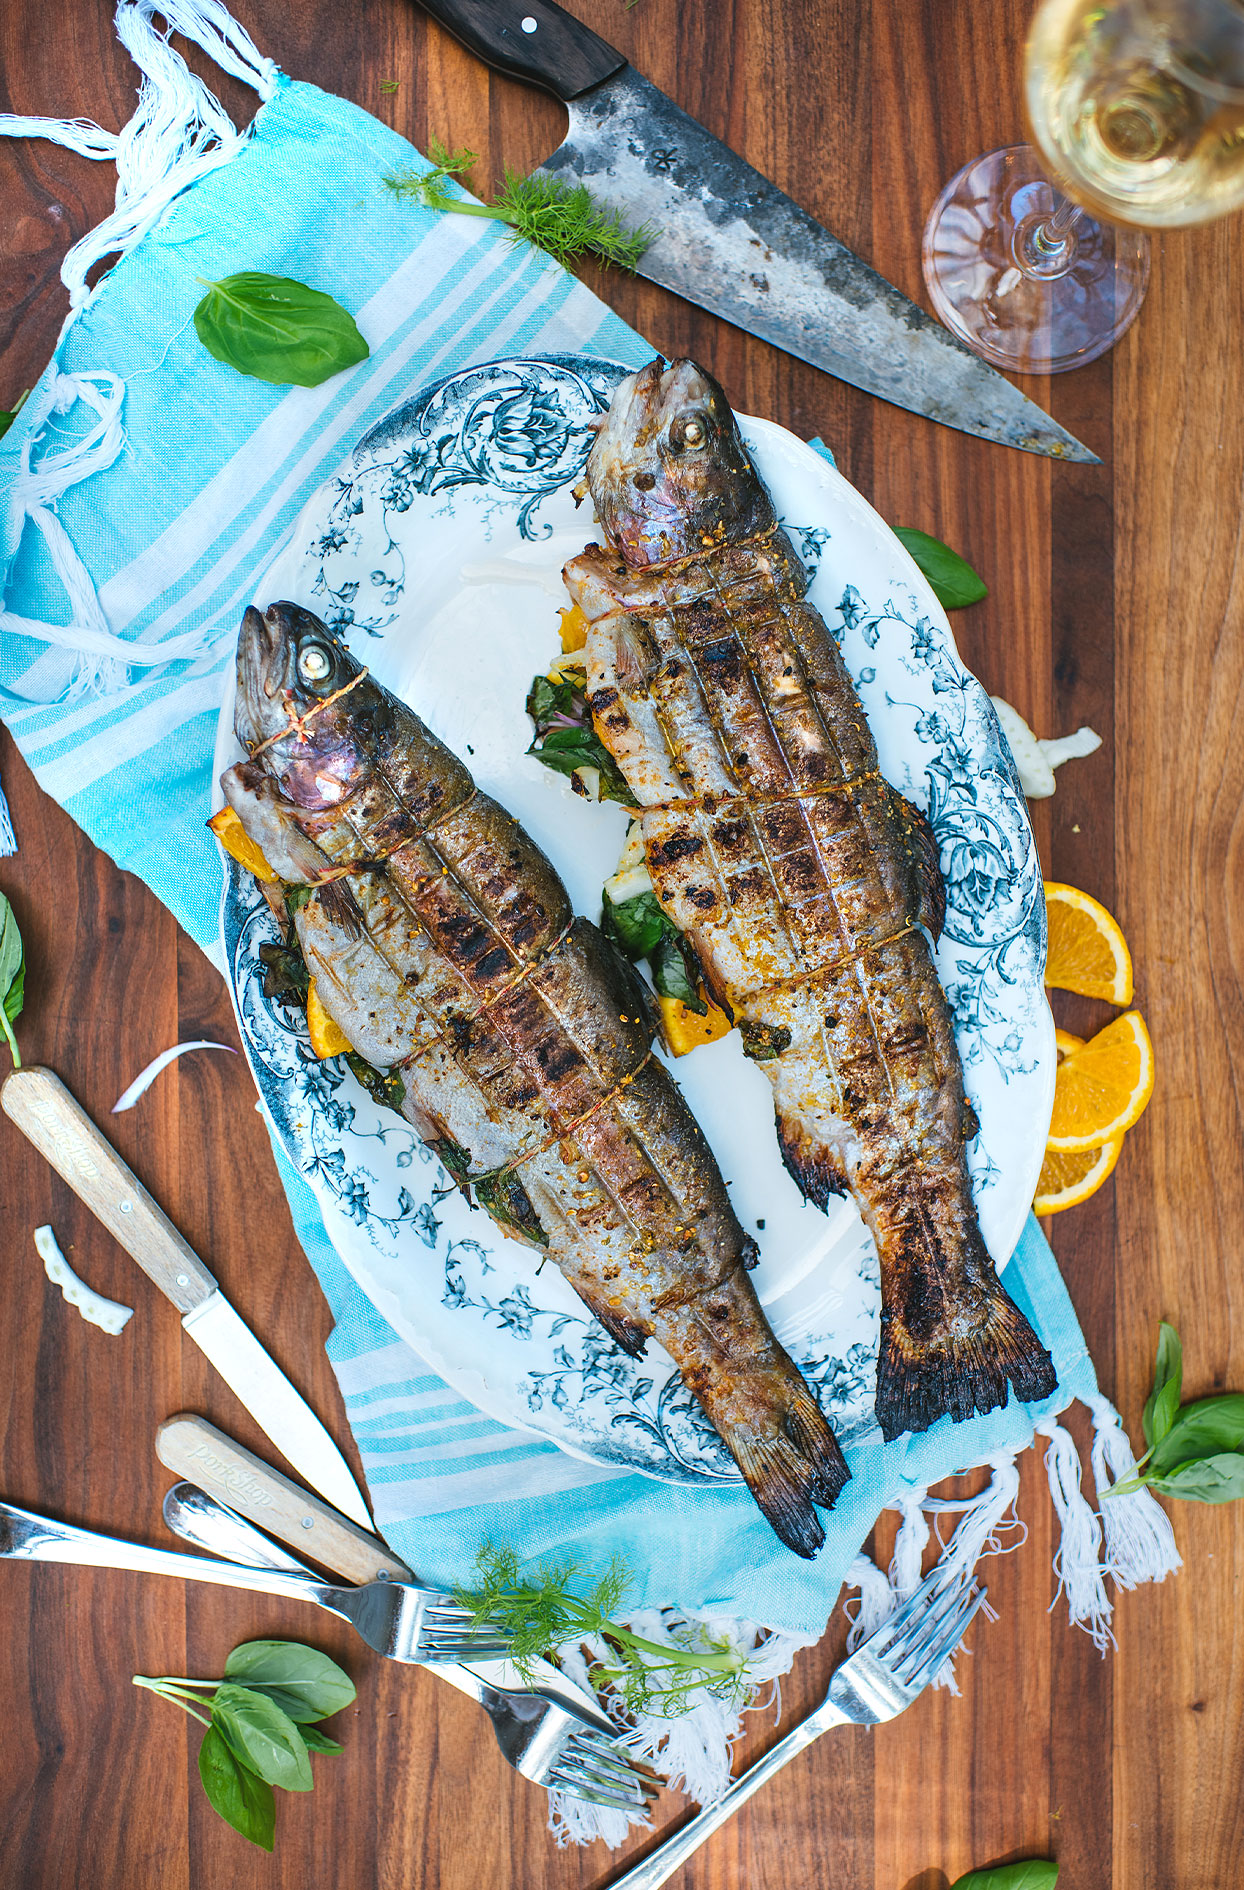 Grilled trout with fennel, orange and basil